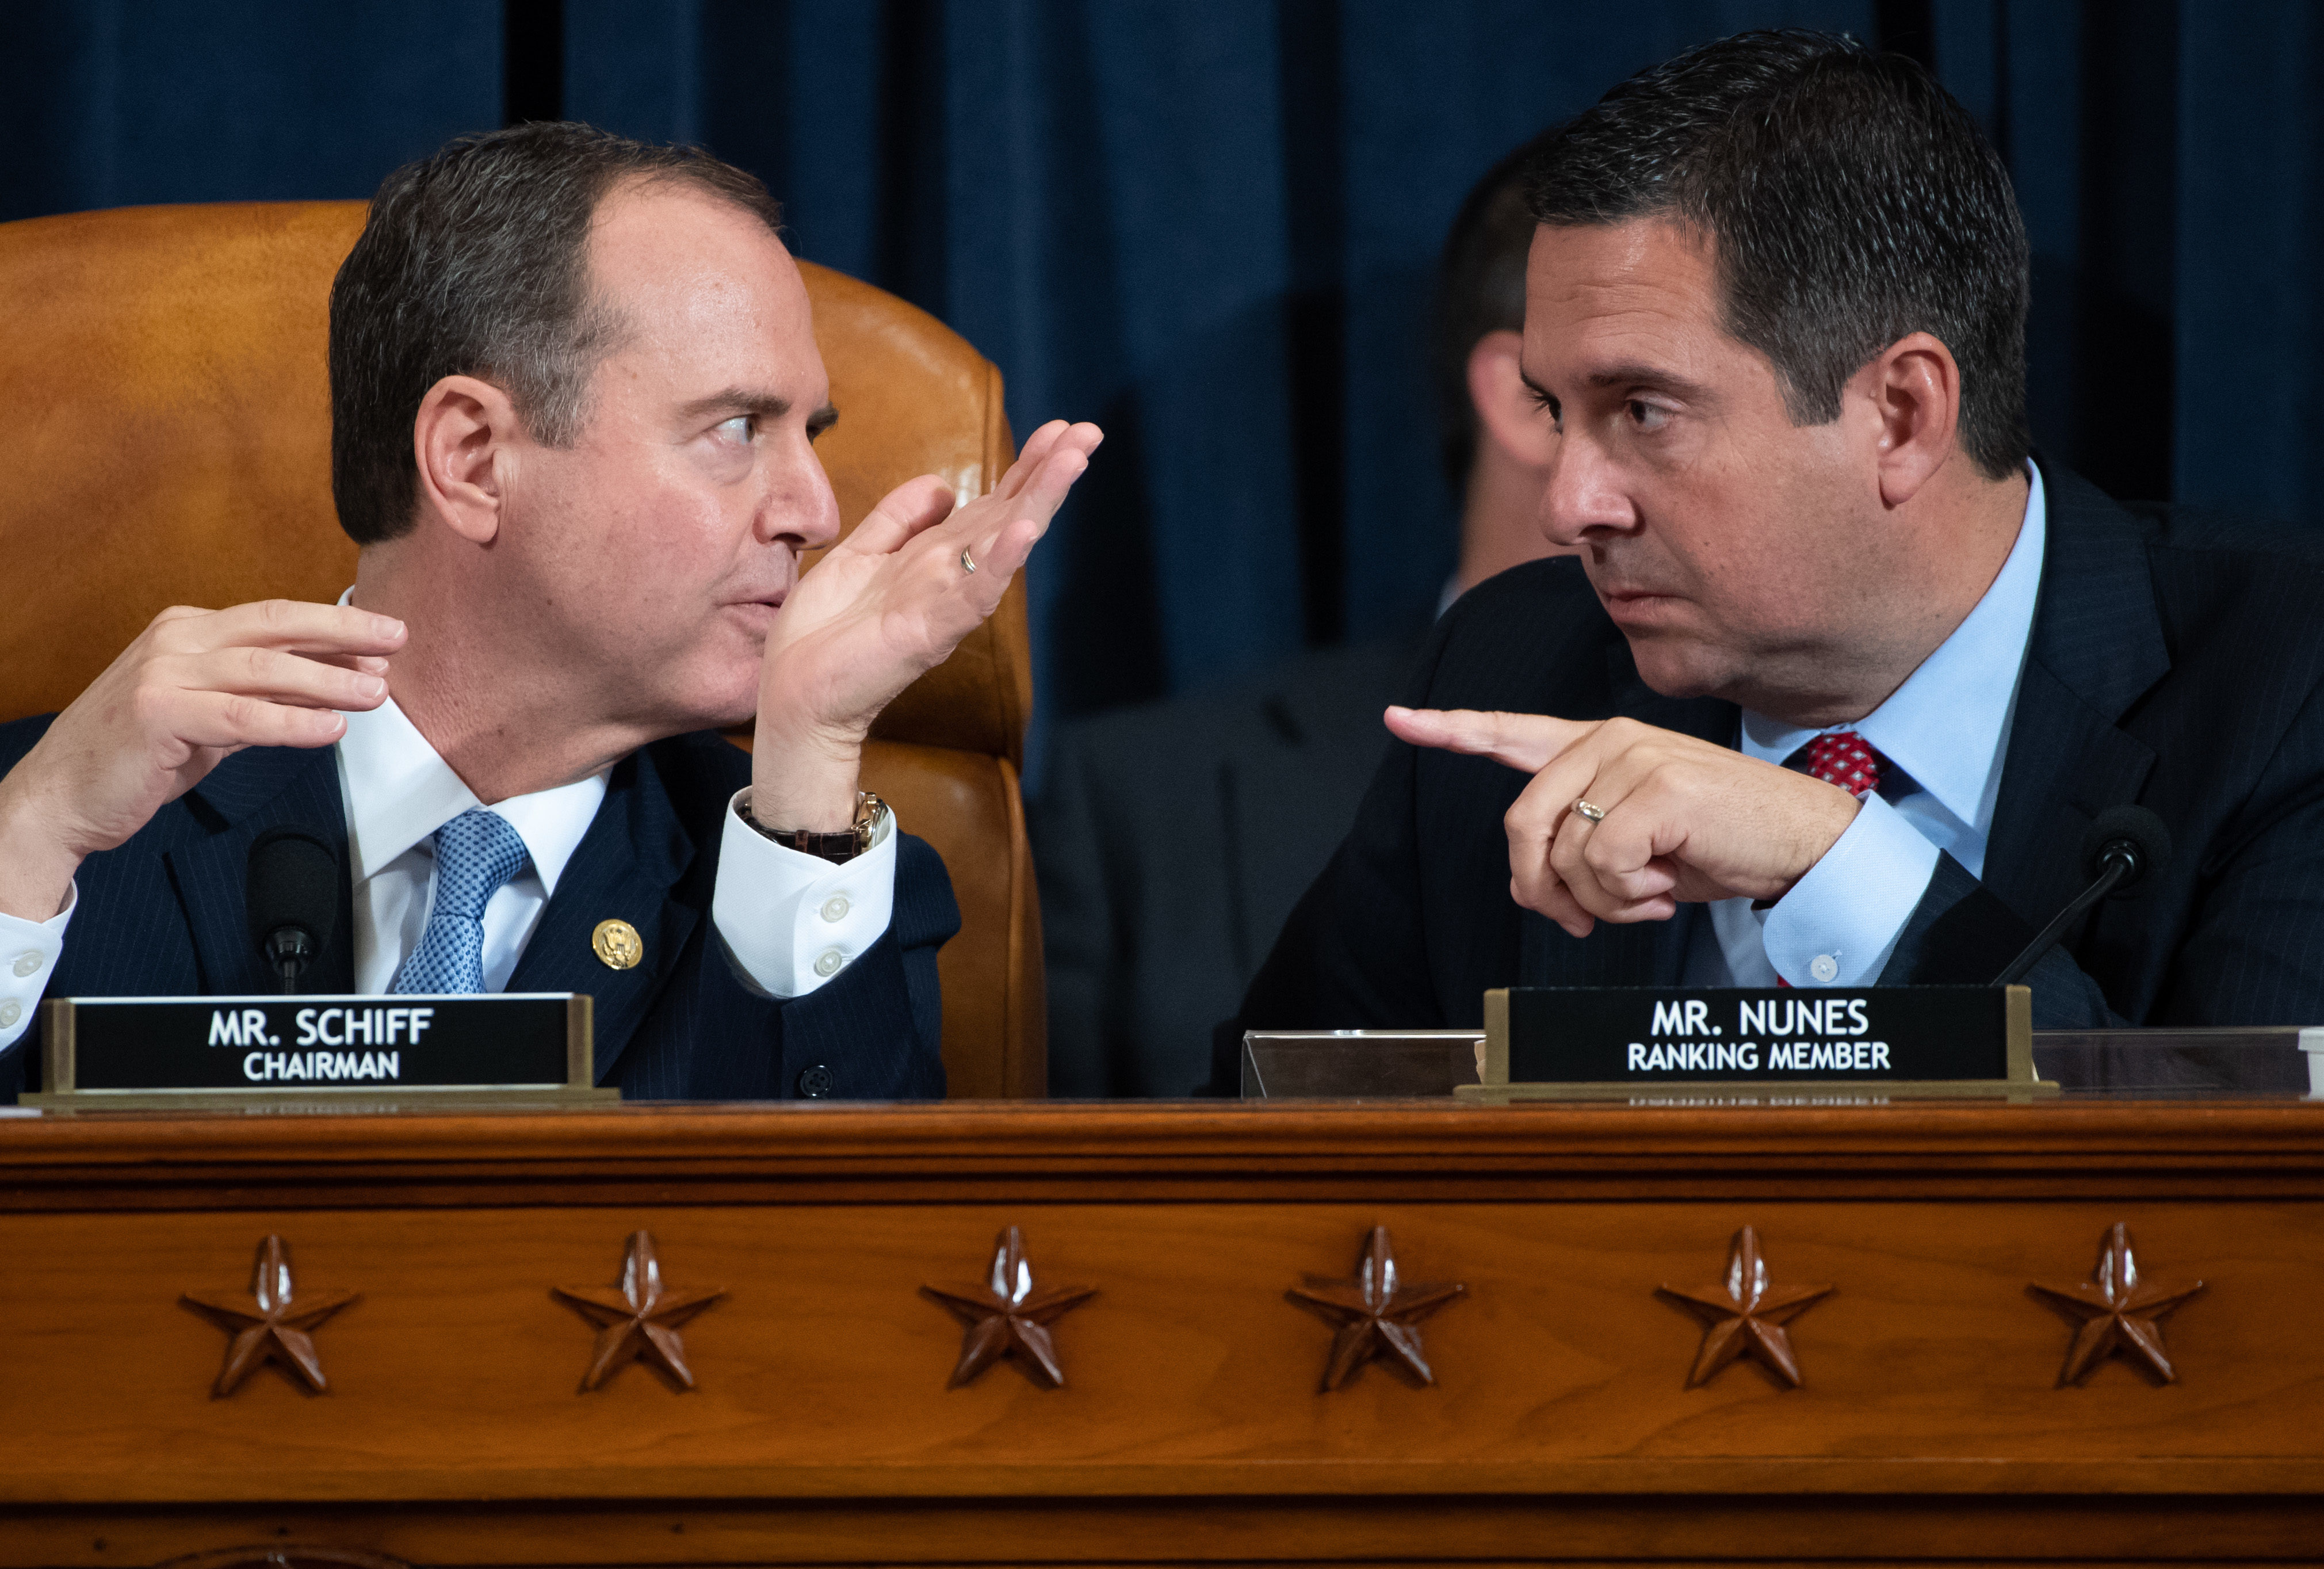 Chairman Adam Schiff (L), Democrat of California, and Ranking Member Devin Nunes (R), Republican of California, during the first public hearings held by the House Permanent Select Committee on Intelligence as part of the impeachment inquiry into US President Donald Trump. (SAUL LOEB/POOL/AFP via Getty Images)